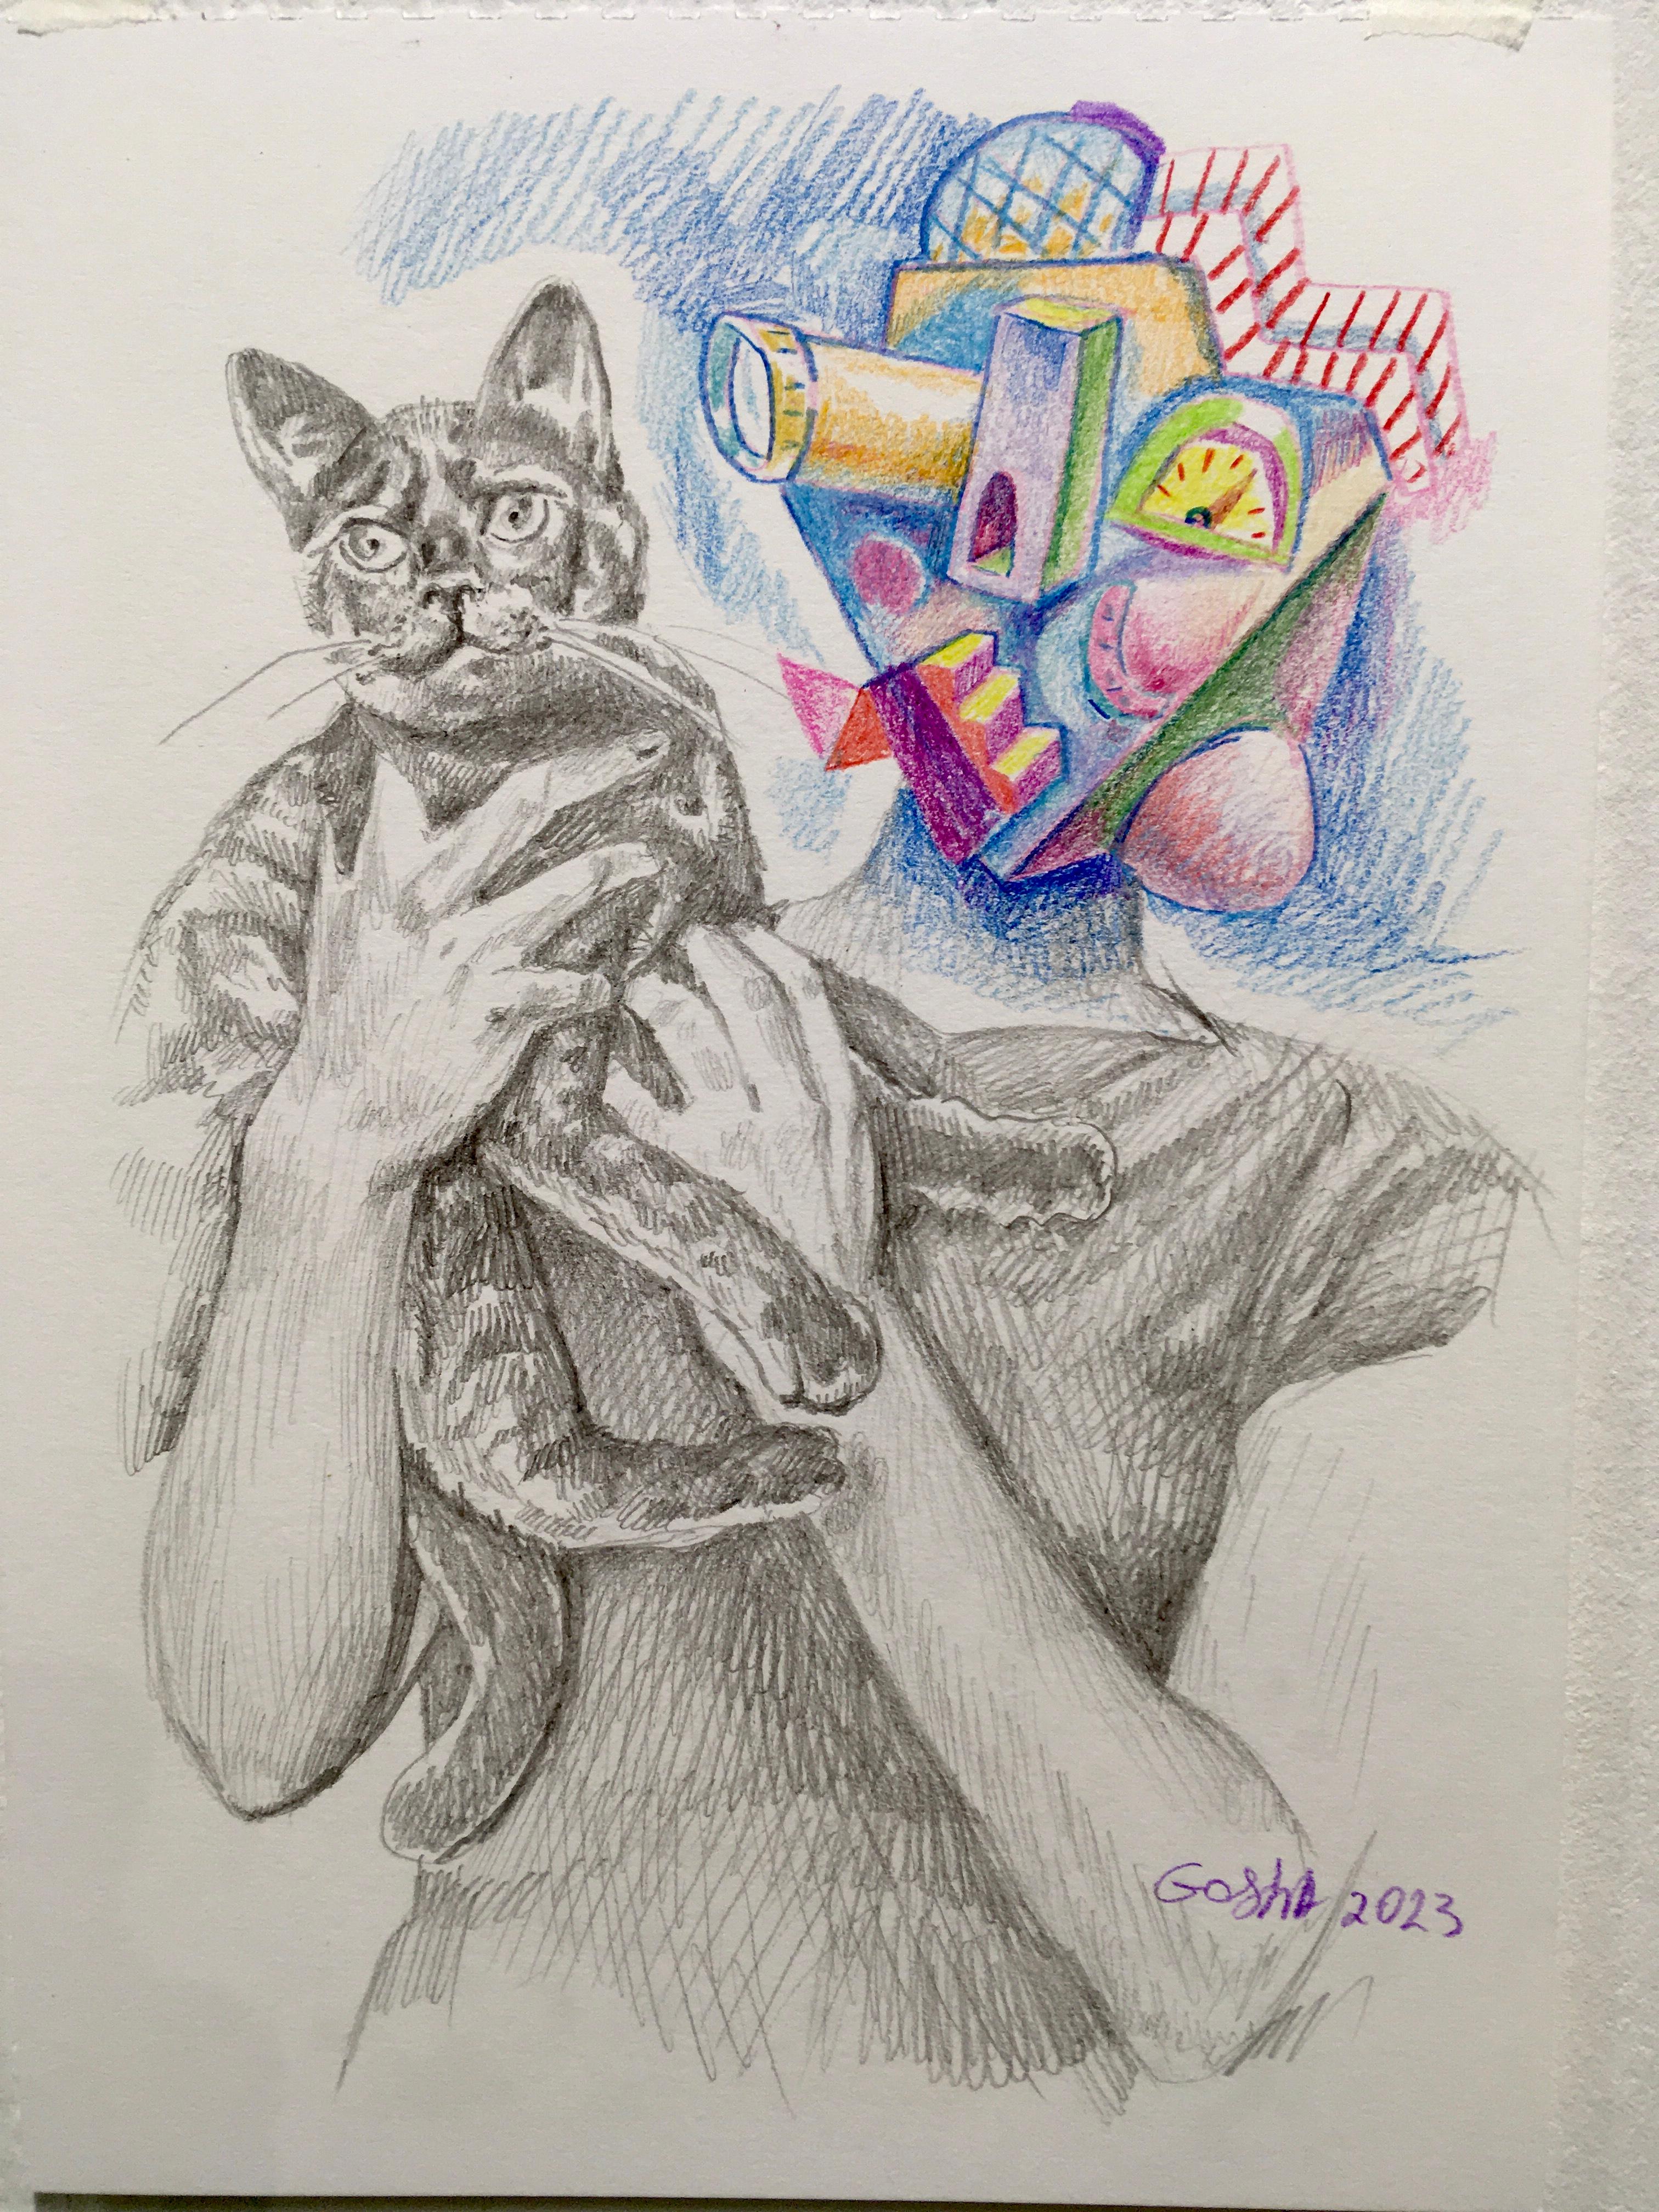 "Cutie" Drawing 12" x 8" inch by Gosha Ostretsov

Pencil on paper 
2023

Born in 1967, in Moscow
Lived in Paris for ten years (1988 - 1998), now lives and works in Moscow.

PUBLIC COLLECTIONS:

The State Tretyakov Gallery, St. Petersburg, Russia
The